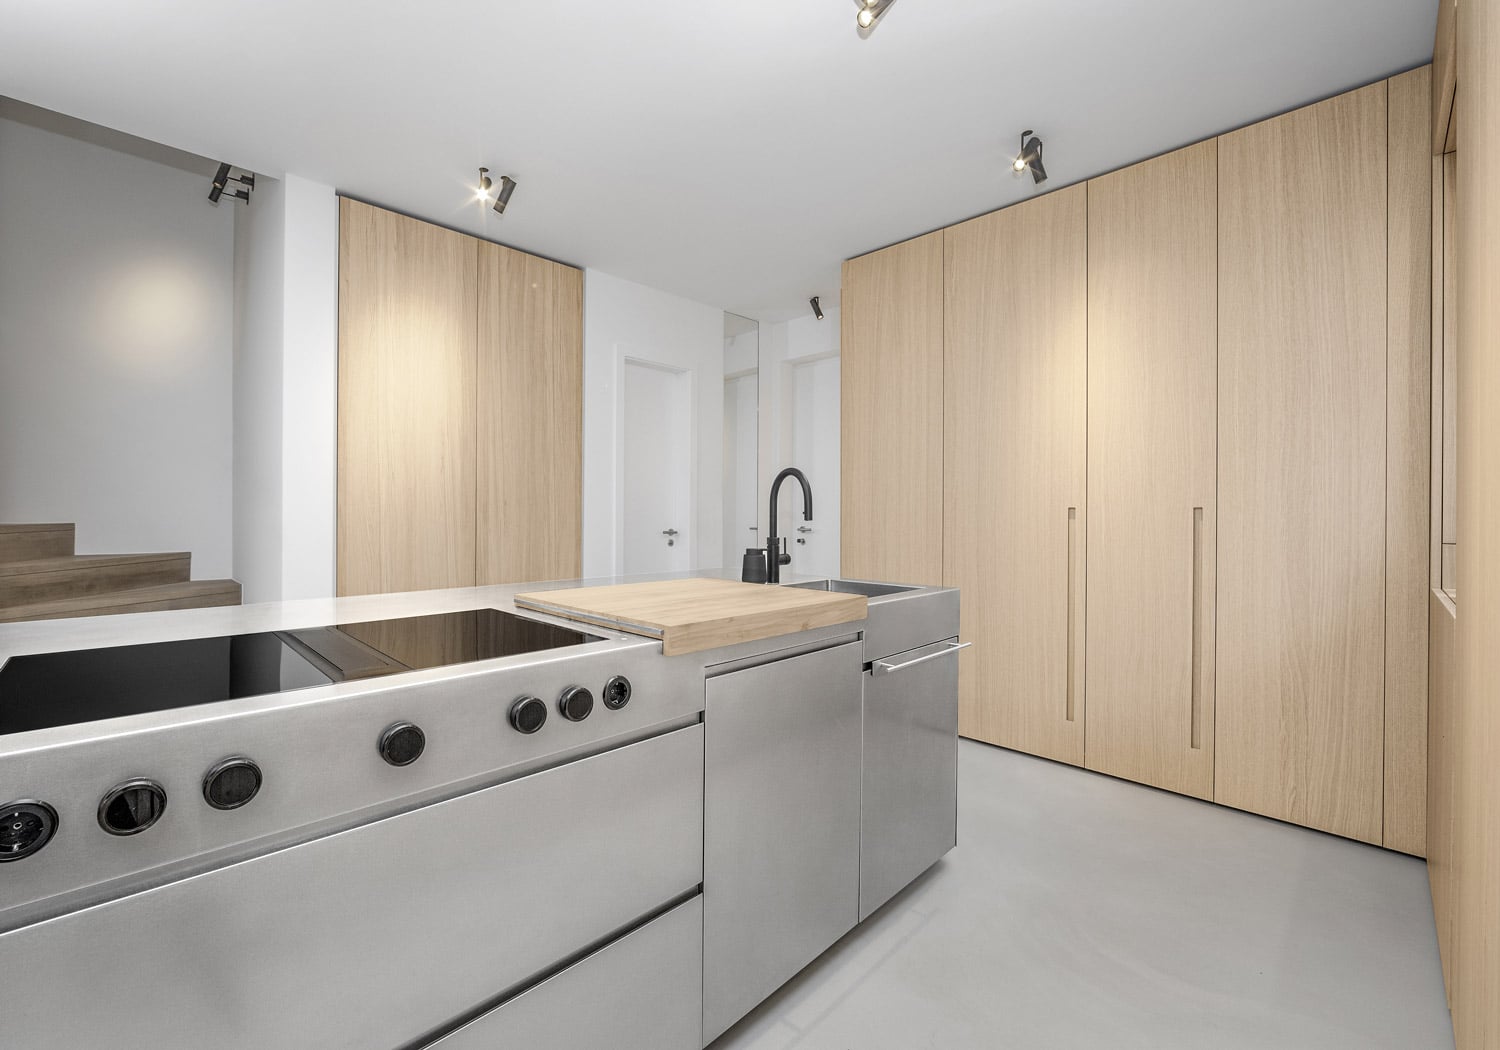 The design of the island mirrors large professional kitchens, in both aesthetics and functionality. The light Natural Oak softens the look of the stainless steel.